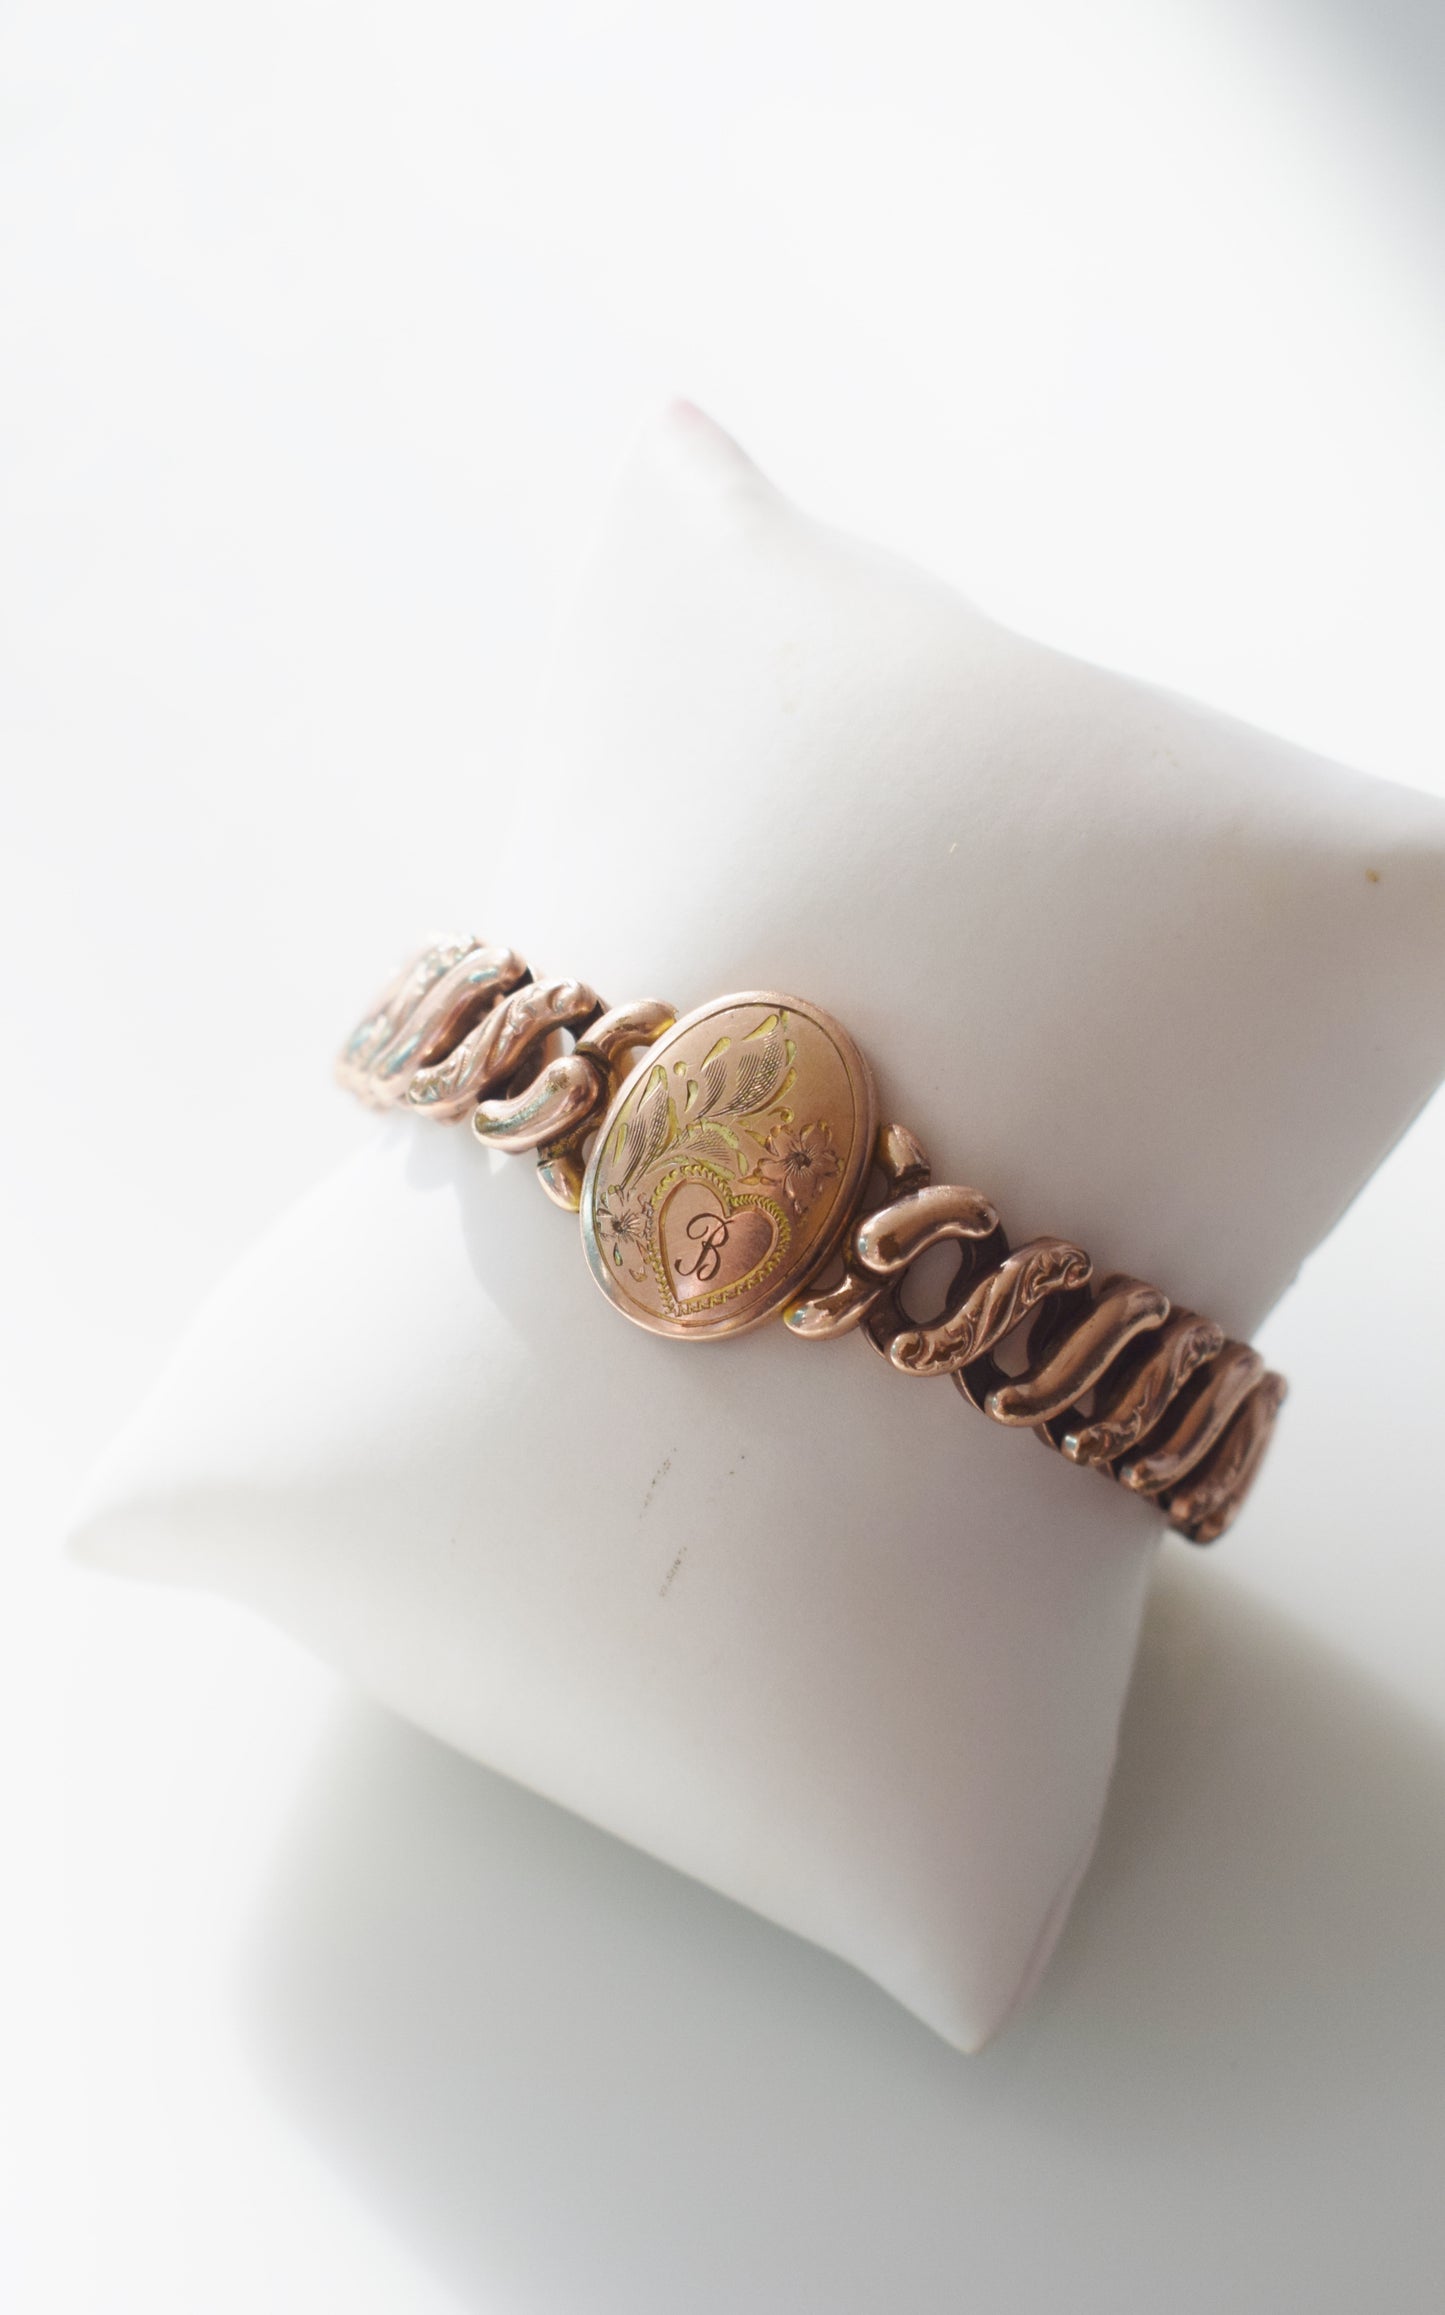 1940s Sweetheart Bracelet with "B" Initial